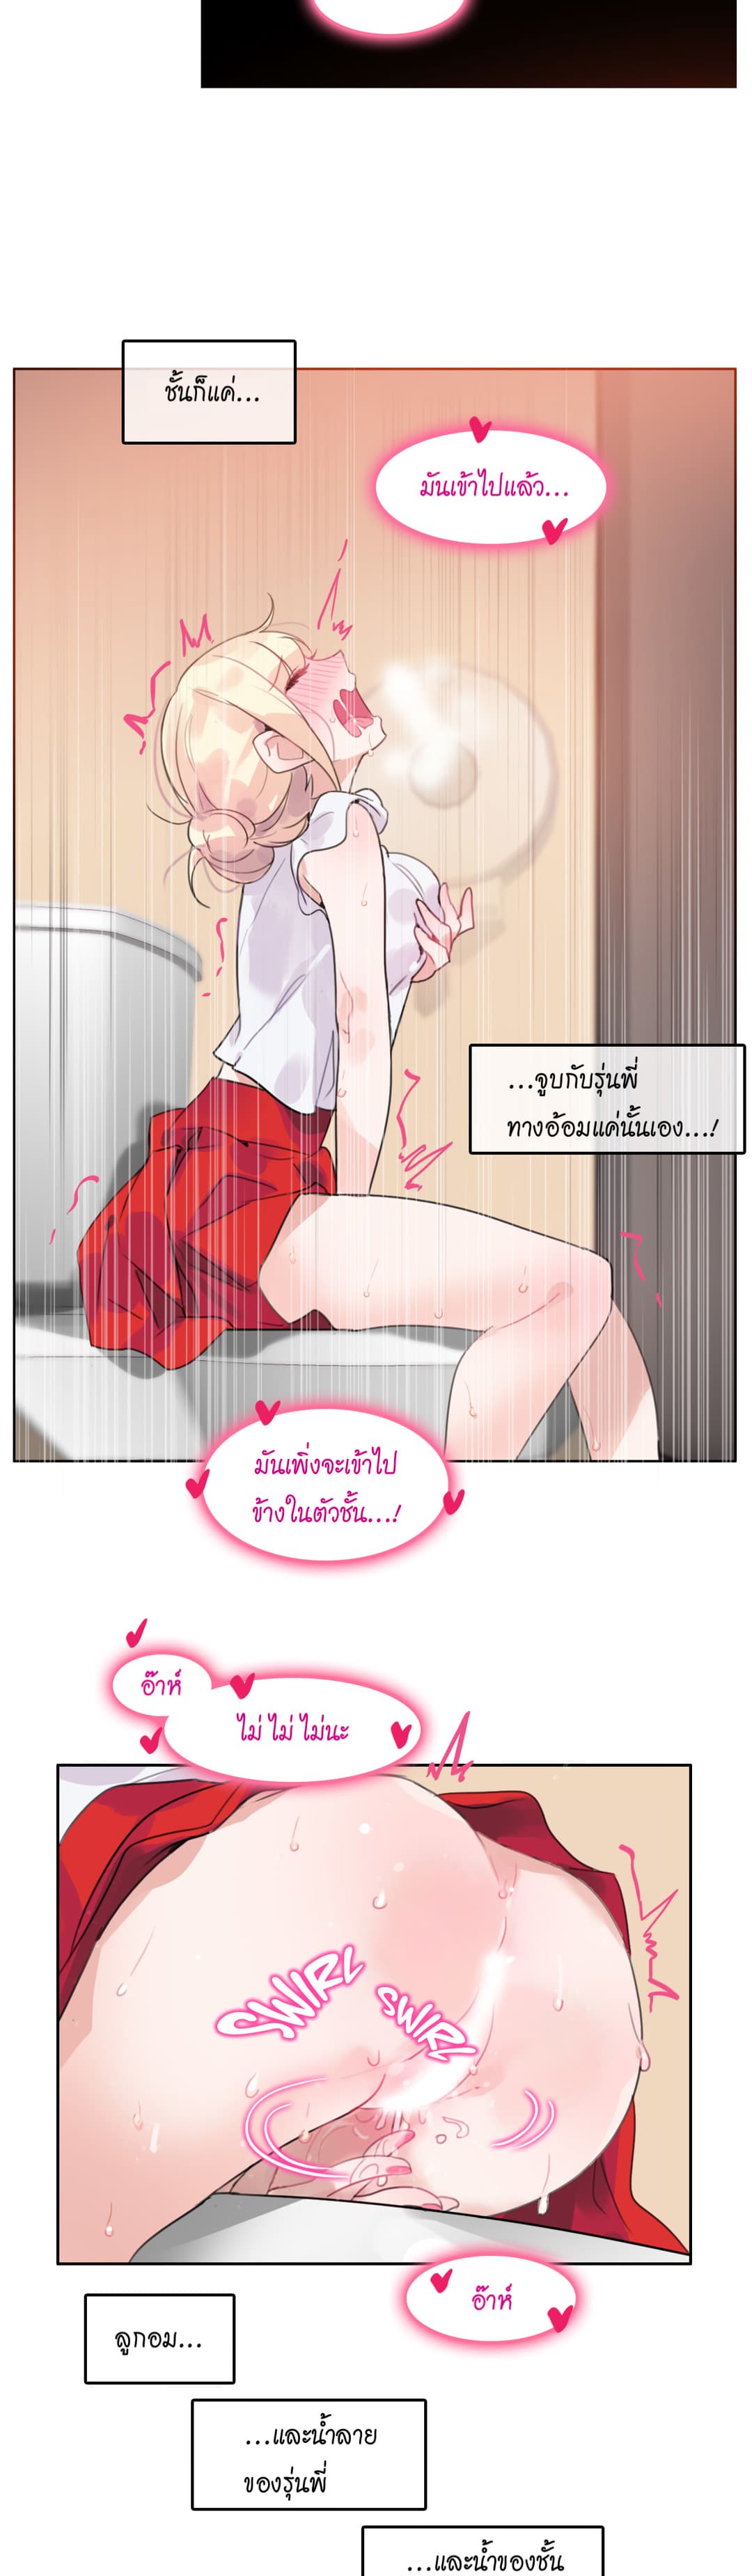 A Pervert’s Daily Life 16 (14)